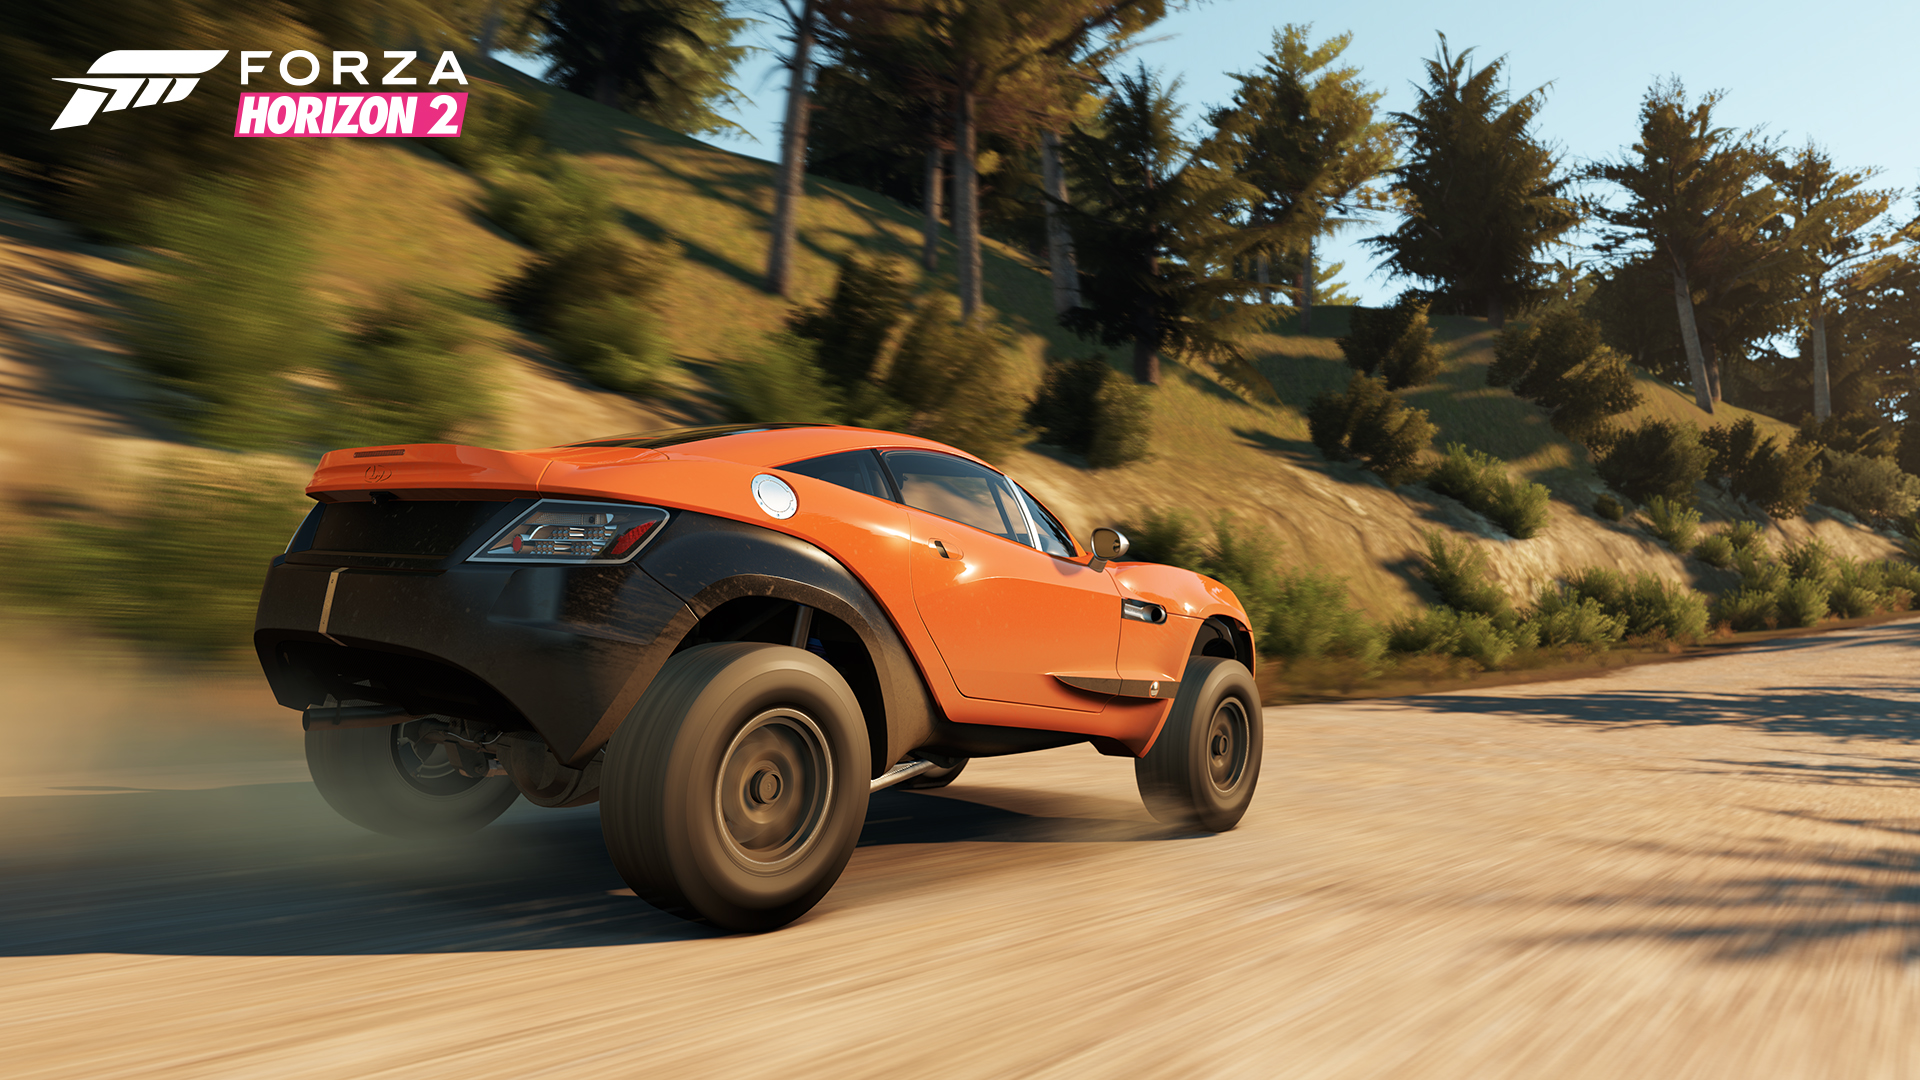 Video For Start Forza Horizon 2 with Several Exciting Cars Earned through Forza Rewards